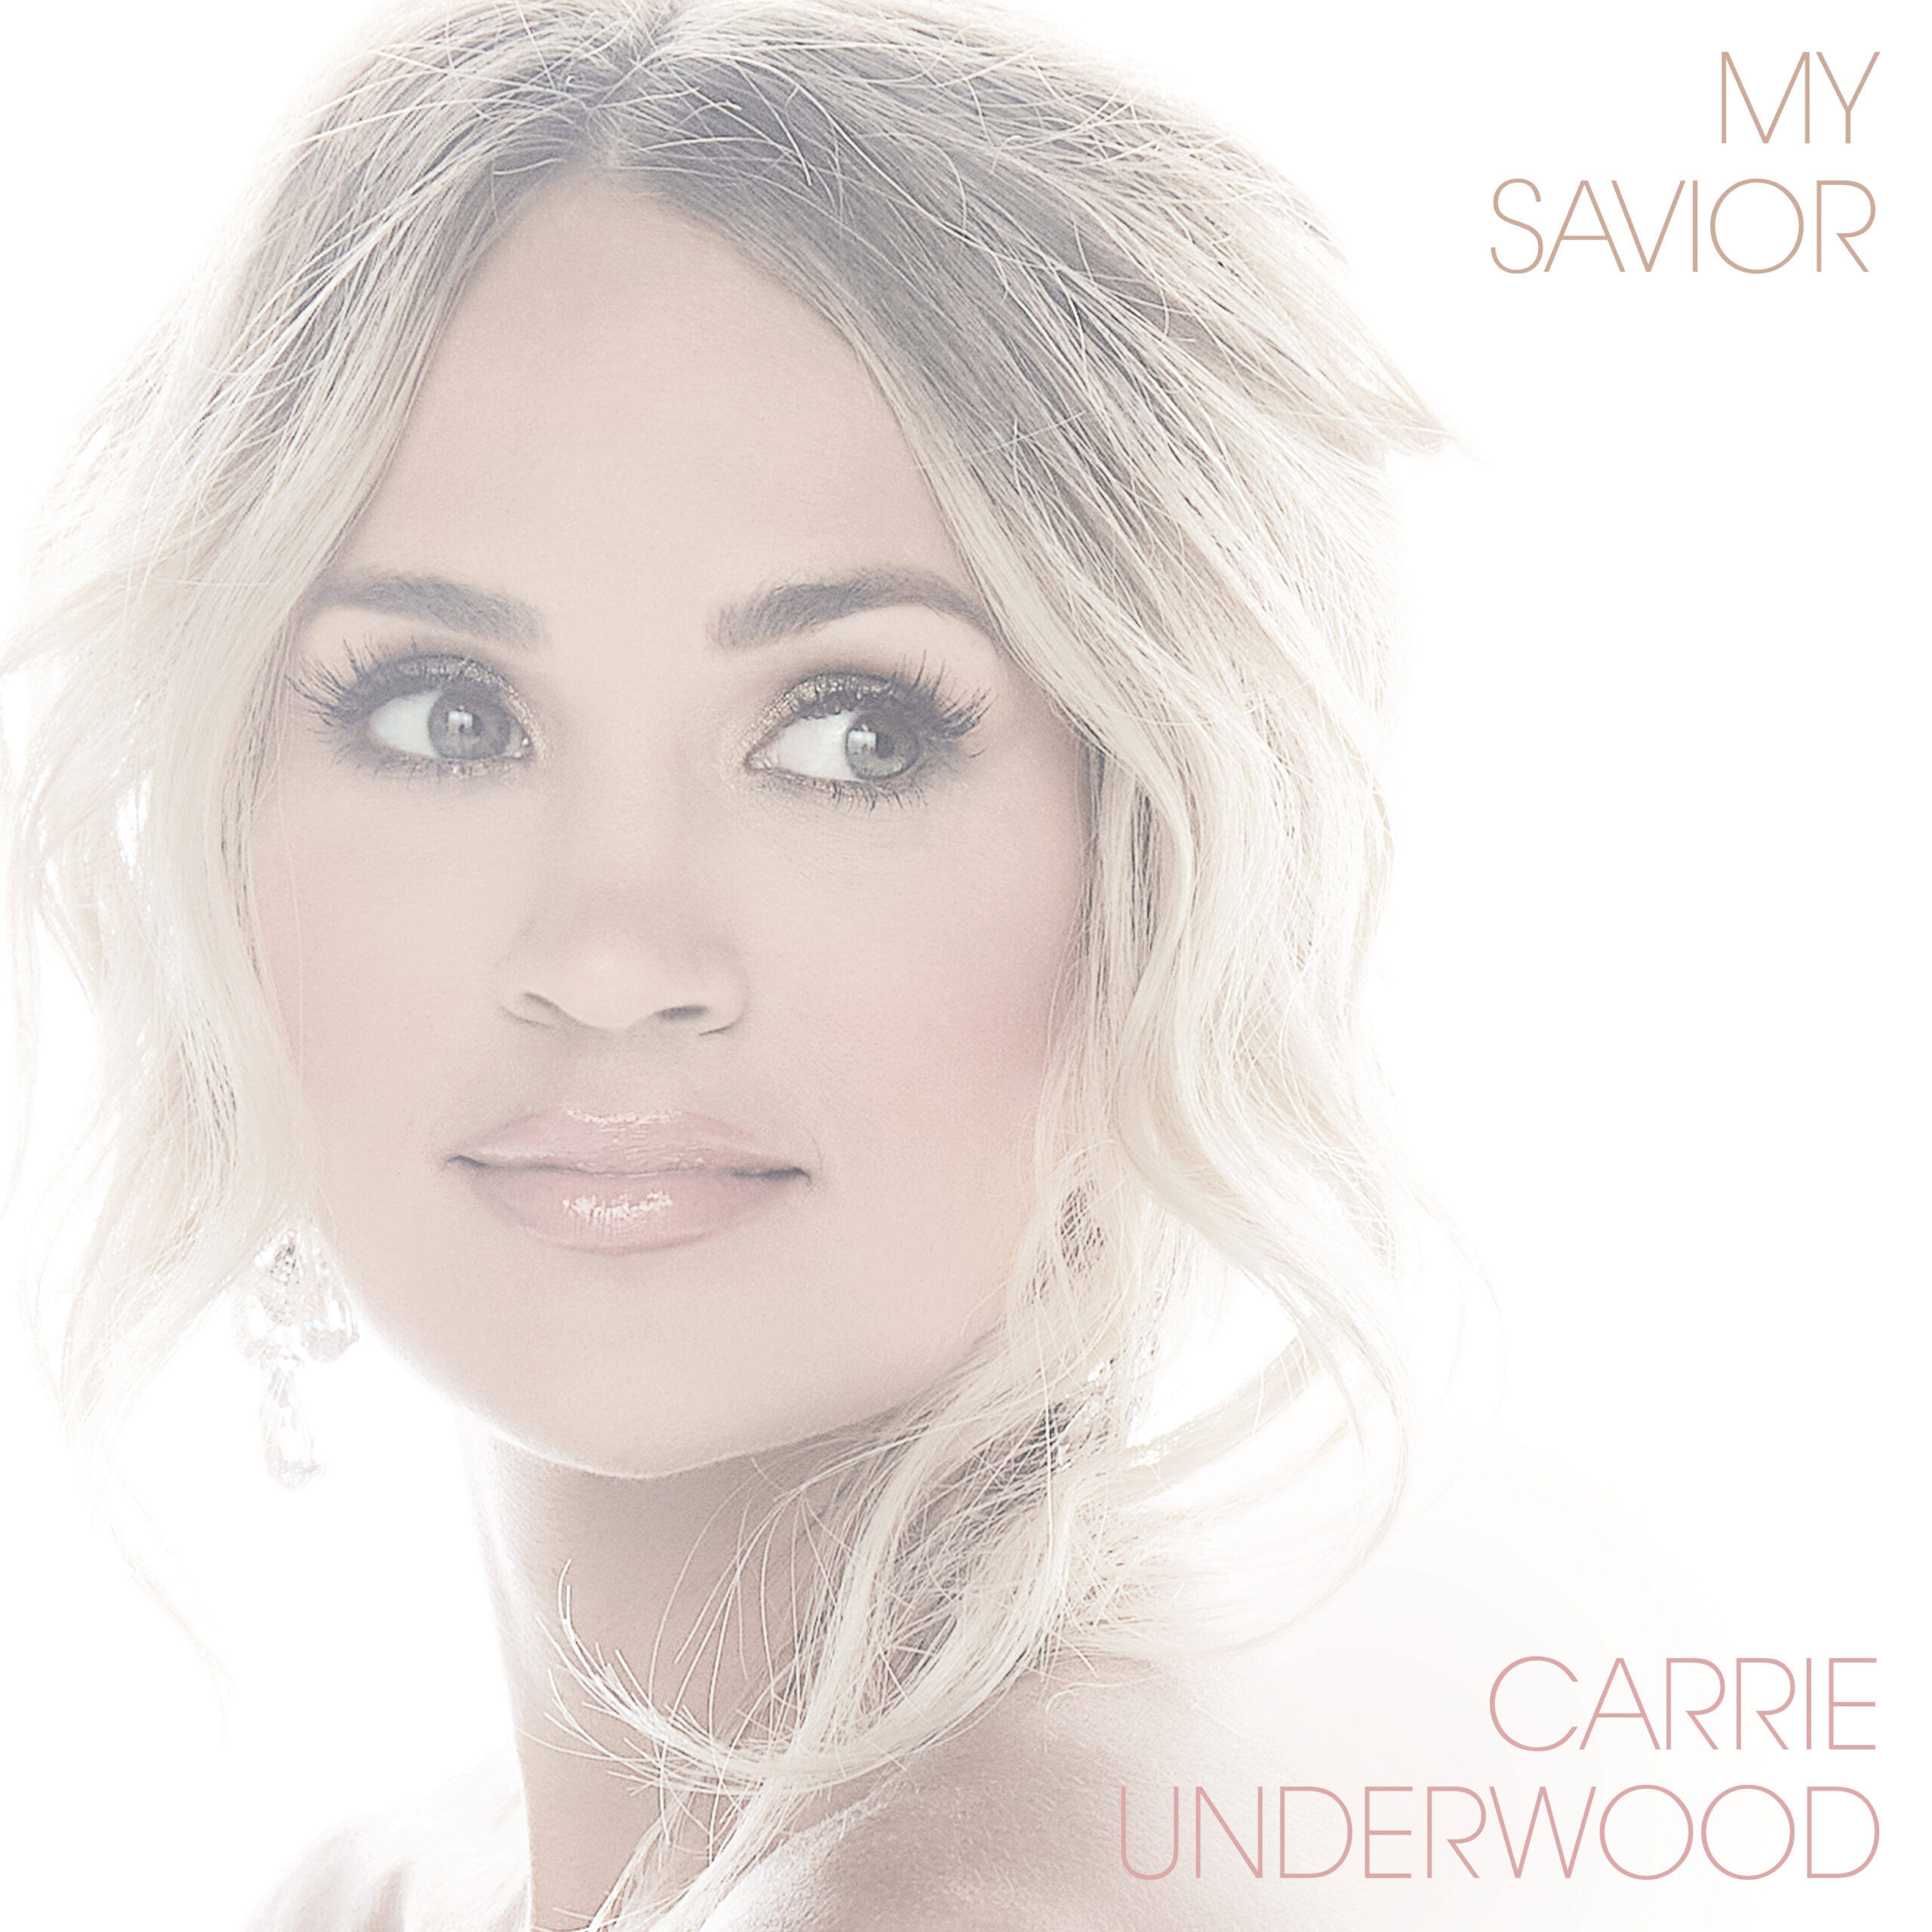 Carrie Underwood Announces Release Date For New Album “My Savior”